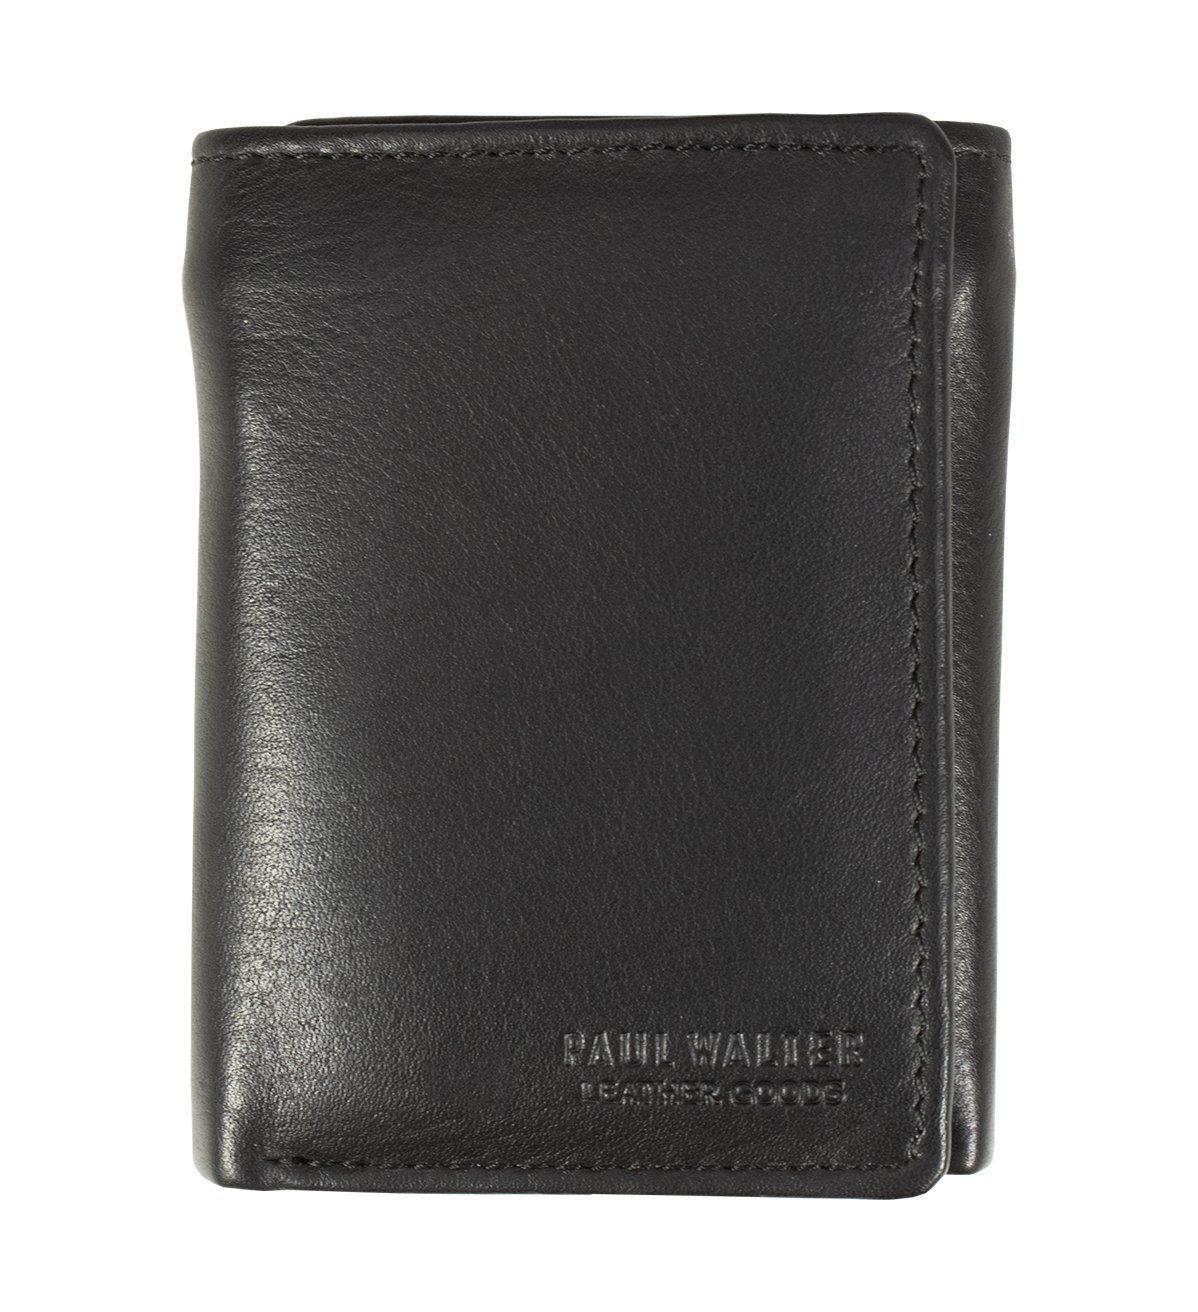 Premium Trifold Leather Wallet with RFID Blocking - #P-86 RF